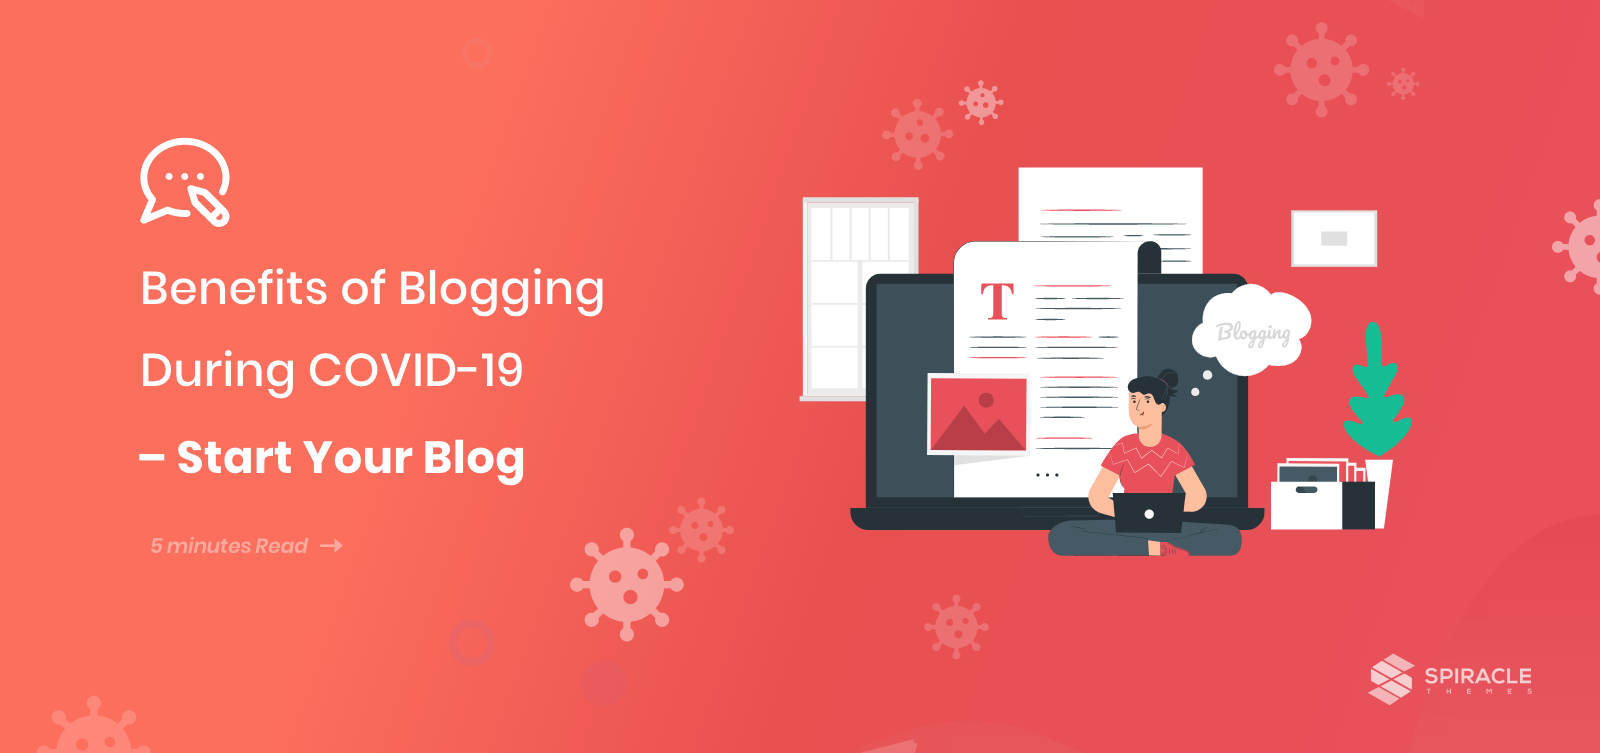 Benefits of Blogging During COVID-19